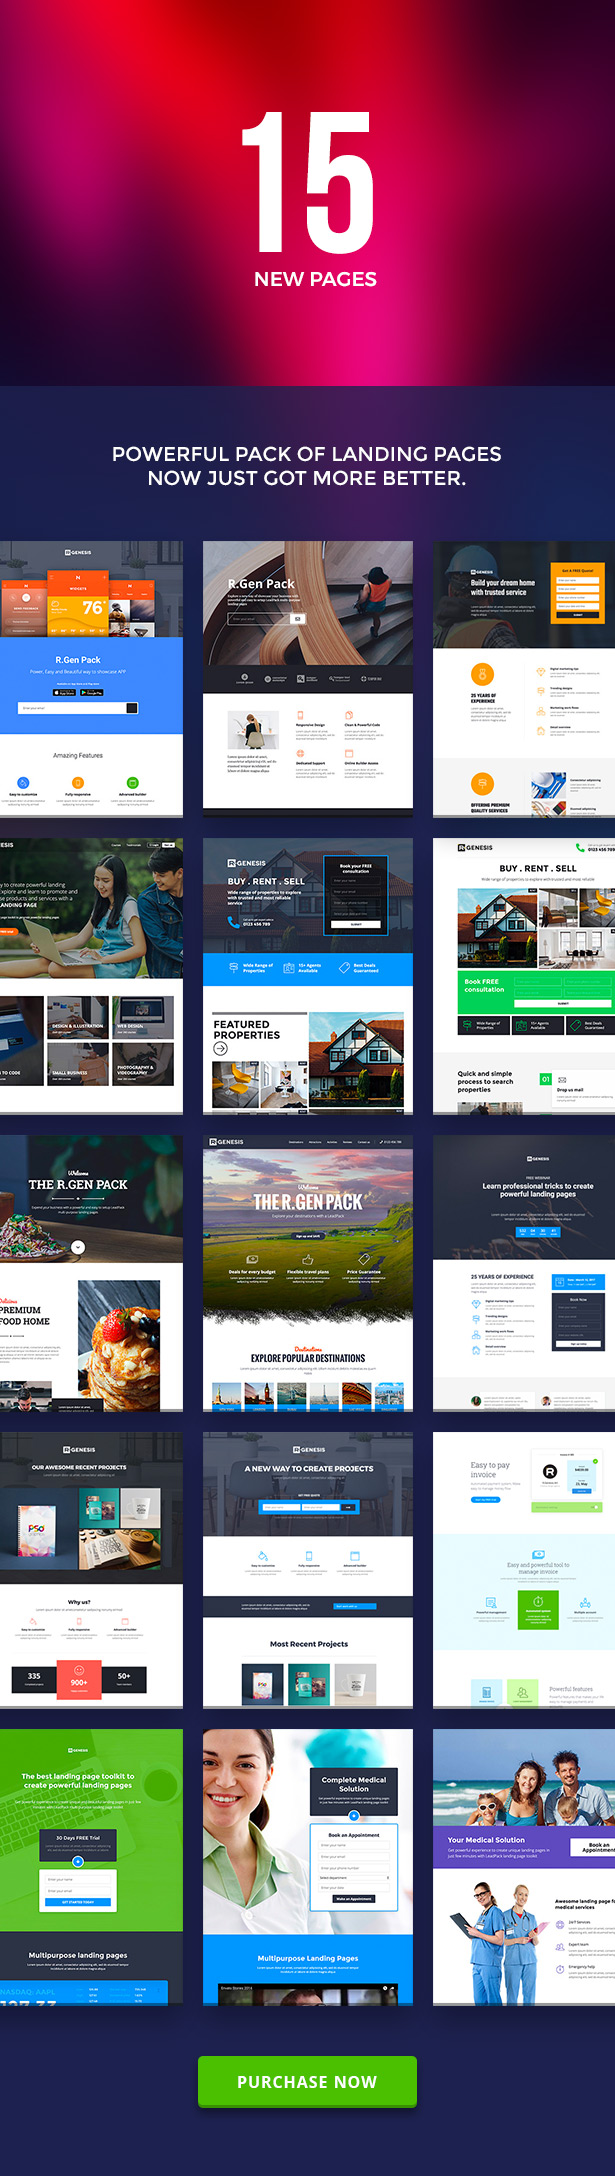 RGen | HTML Landing Pages with Builder - 3